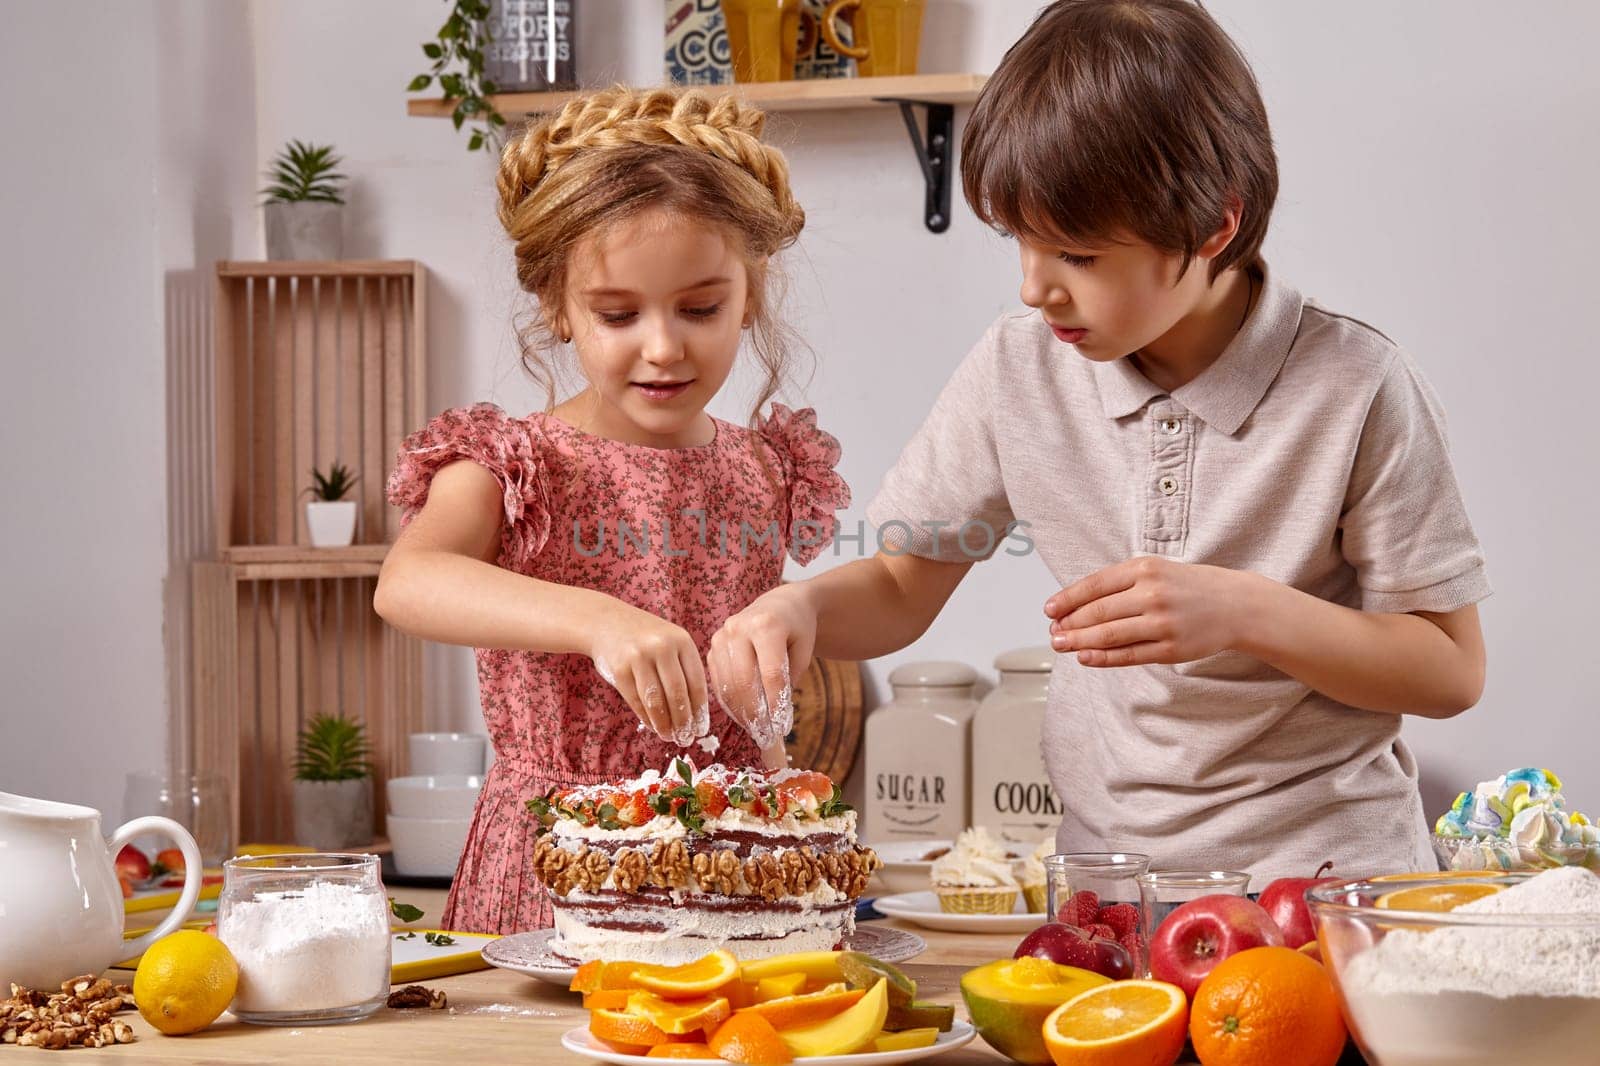 Brunette kid dressed in a light t-shirt and jeans and a blond girl with a braid in her hair, wearing in a pink dress are making a cake at a kitchen, against a white wall with shelves on it. Children carefully sprinkle it with some powdered sugar.